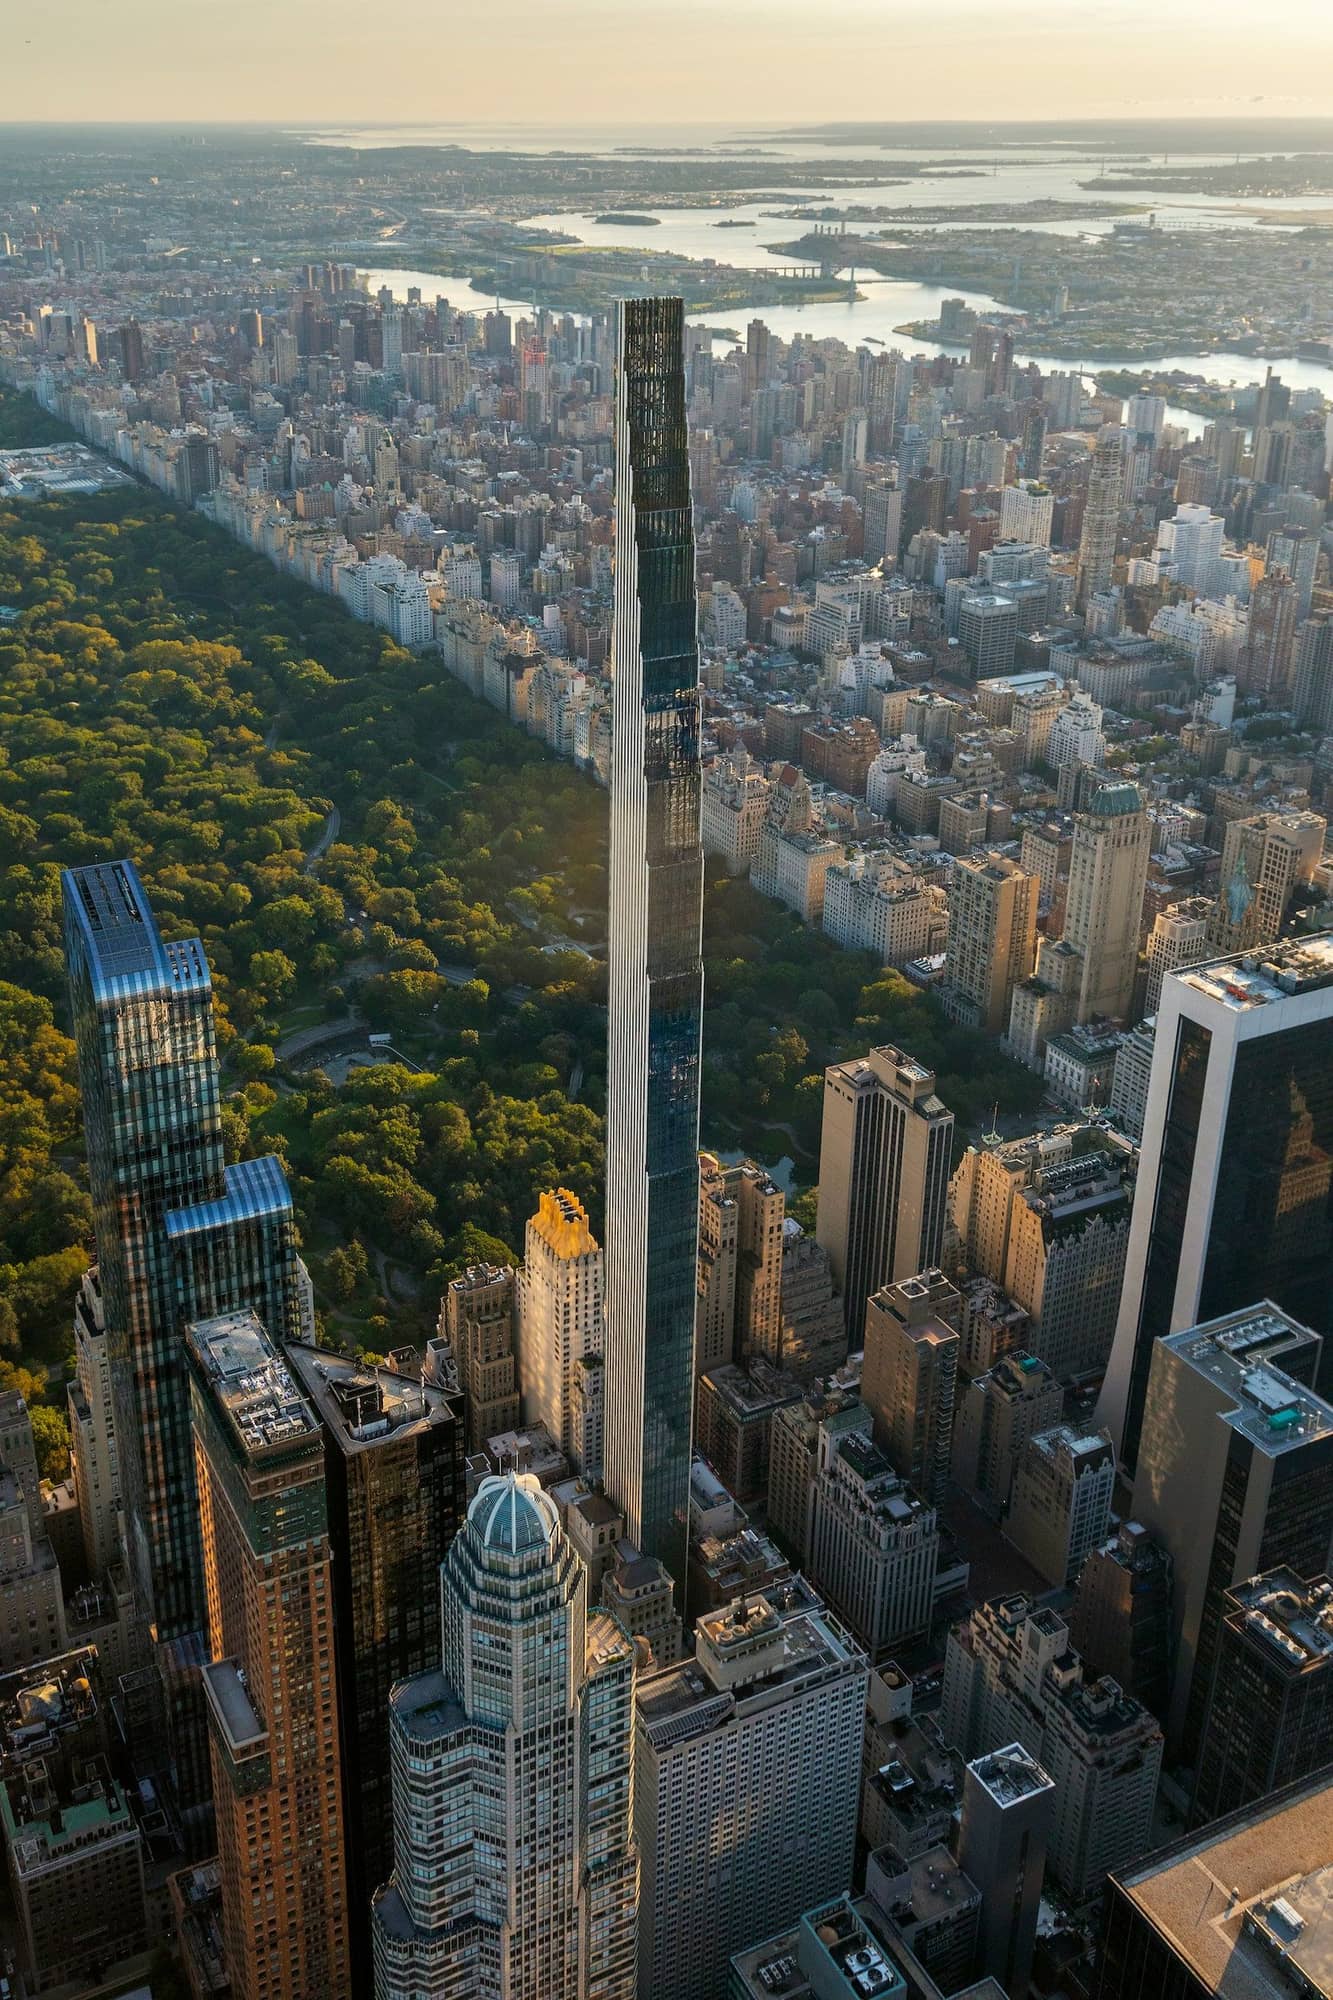 The super skinny Steinway Building stretches over 1,400 feet into the air from NYC's Billionaires' Row.